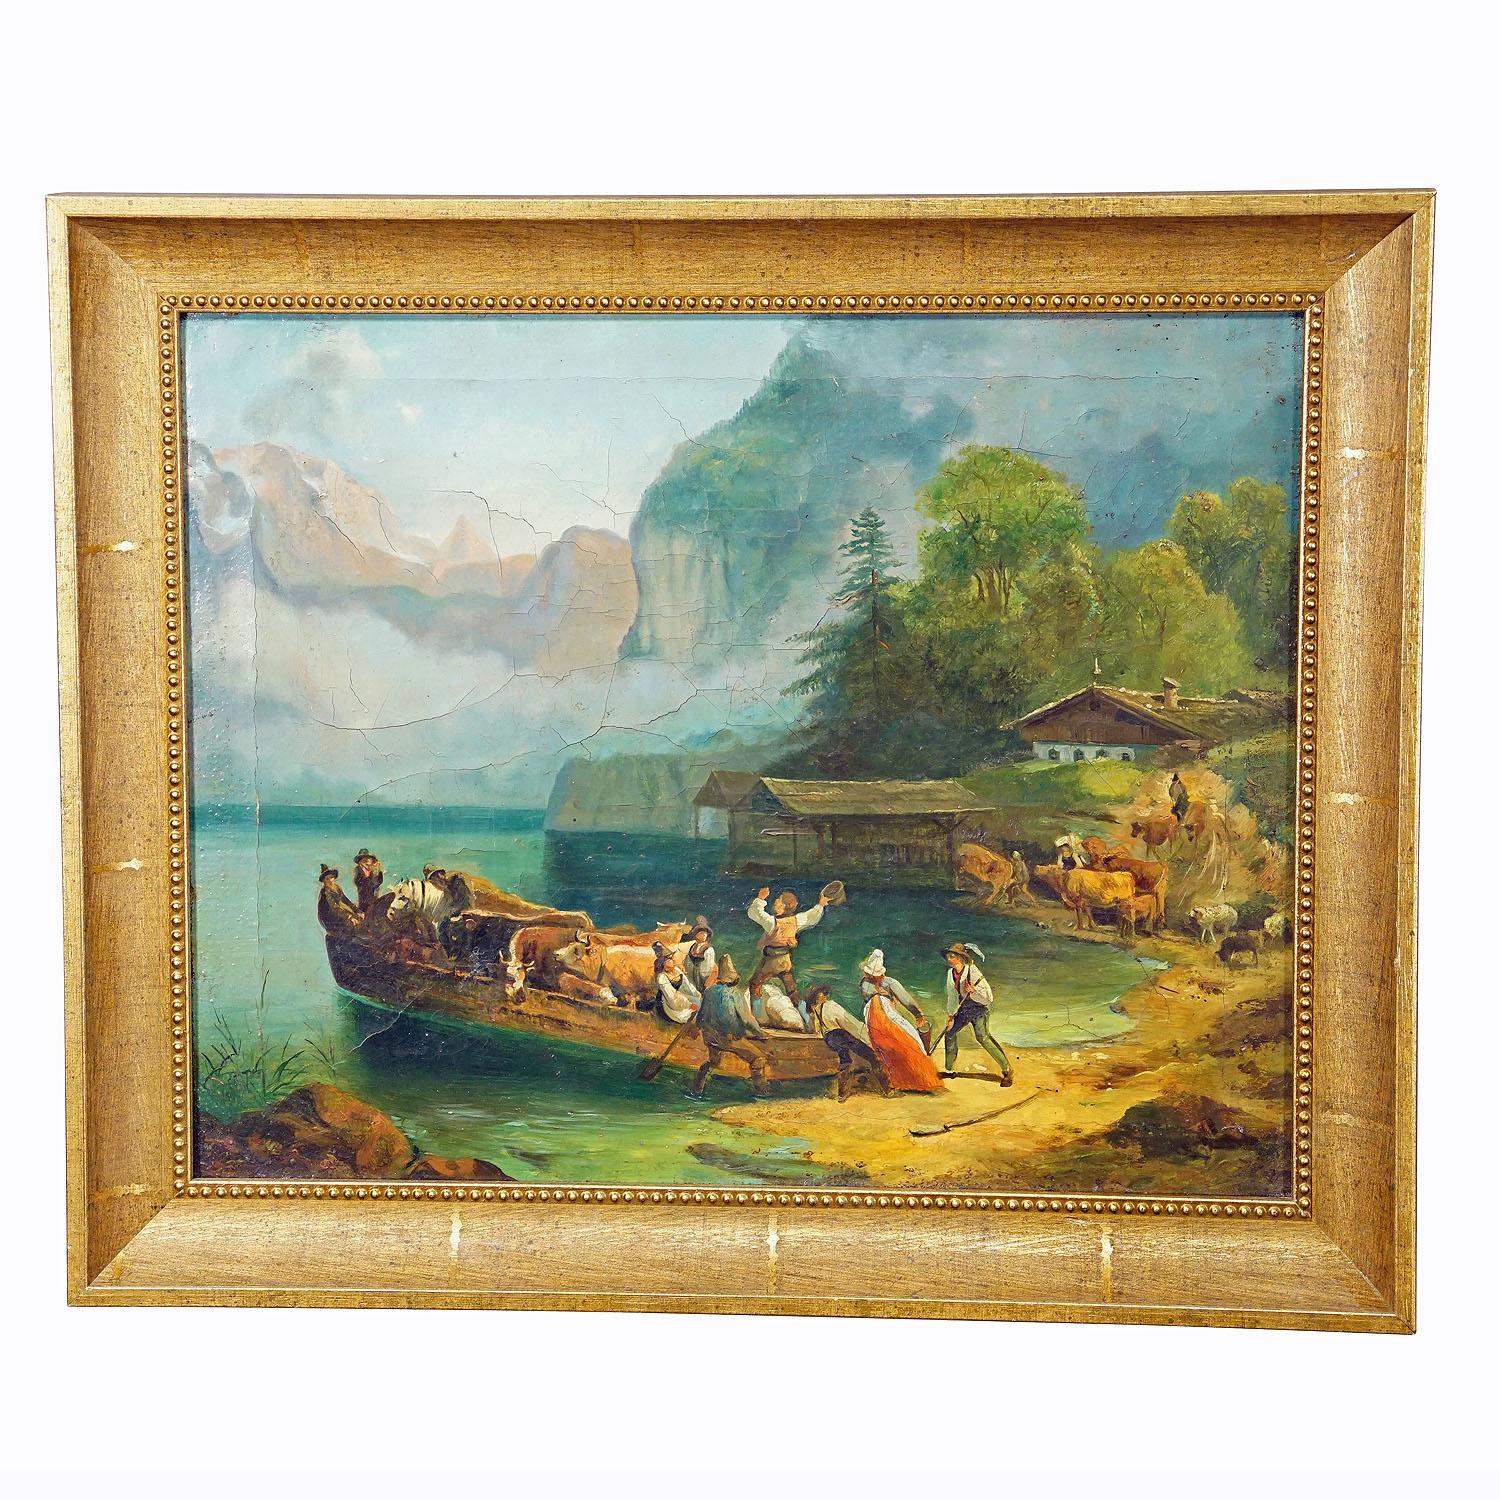 Painting Cattle Carriage on an Alpine Lake, Oil on Canvas 19th century

A lovely antique oil painting depicting a Tyrolian farmers family which loads their cattle heard onto a boat. The scene is located on an mountain lake in the Alpine landscape.